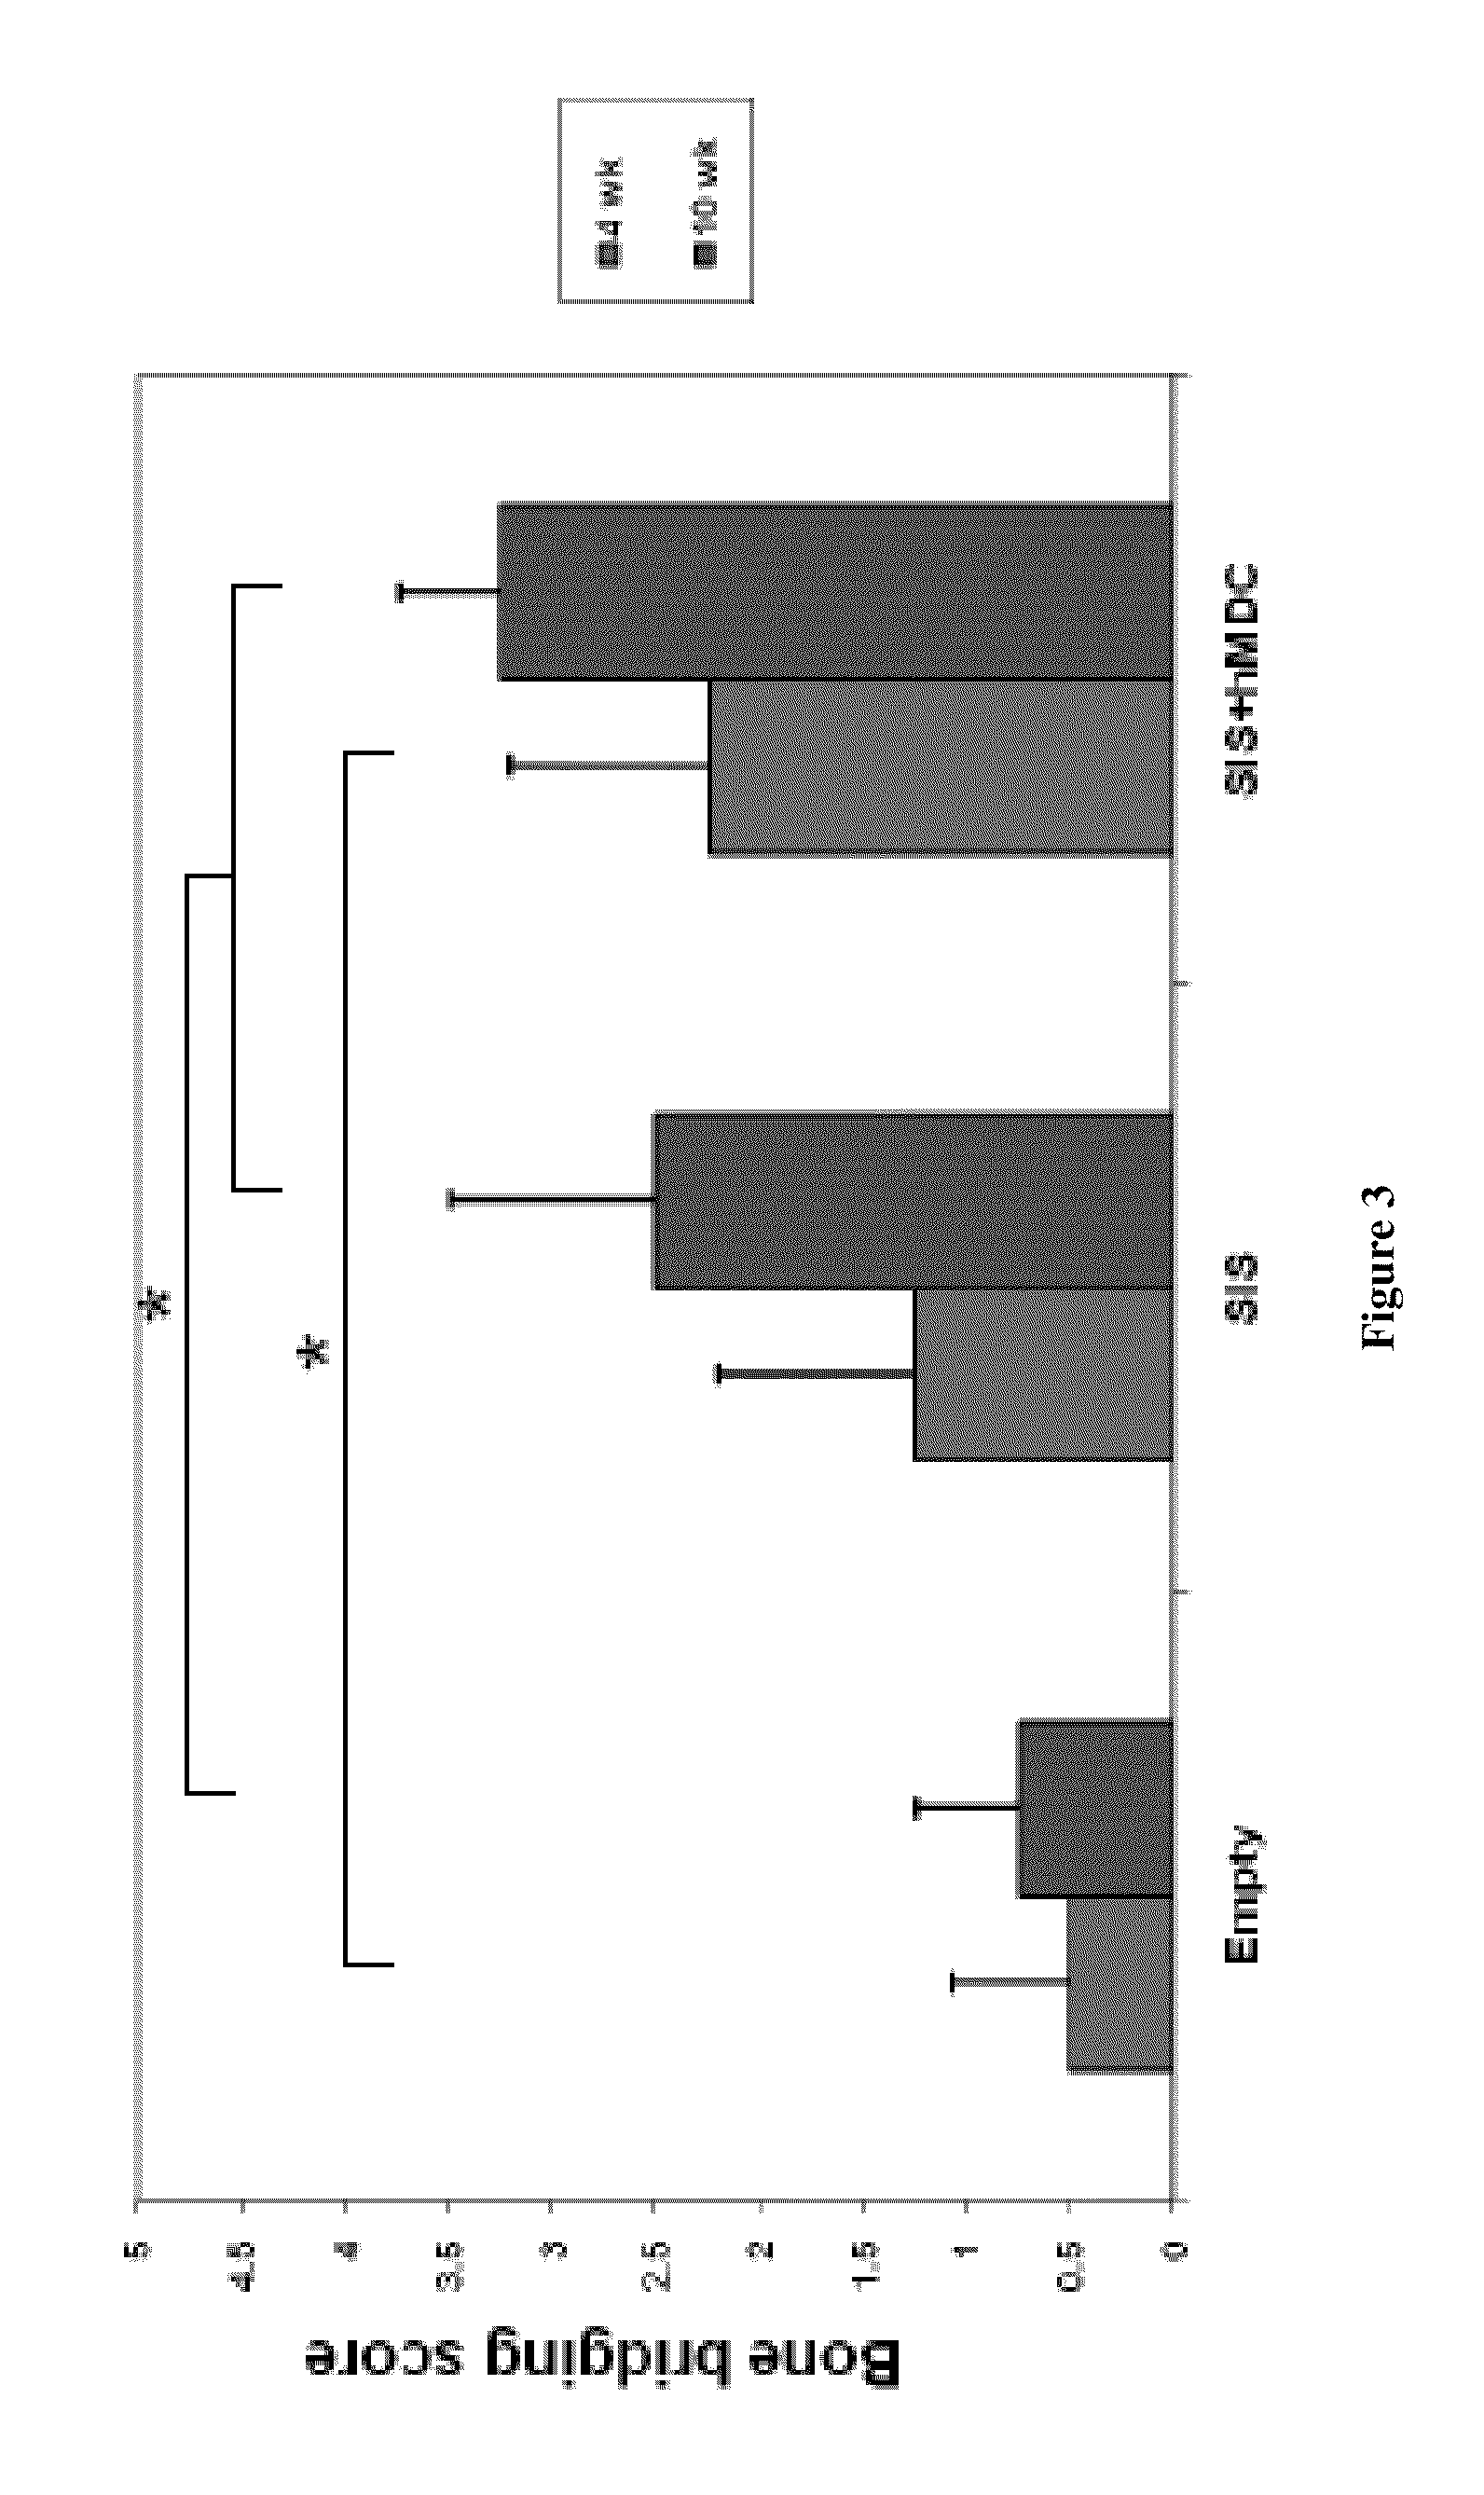 Bone augmentation utilizing muscle-derived progenitor compositions in biocompatible matrix, and treatments thereof